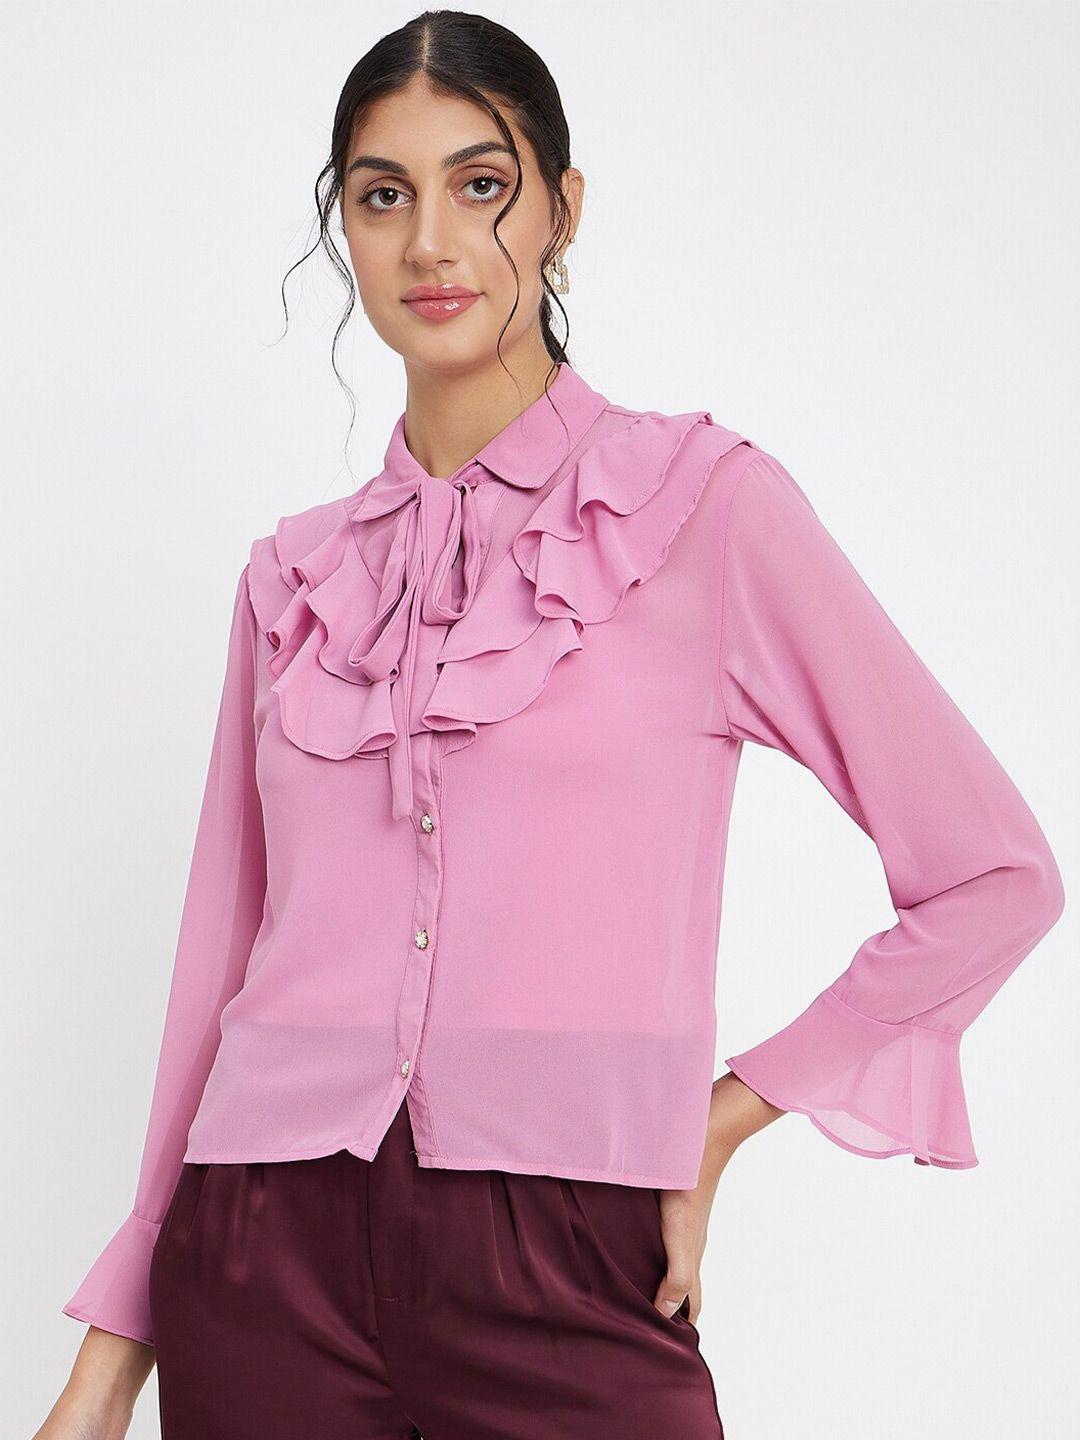 madame tie up neck shirt style top